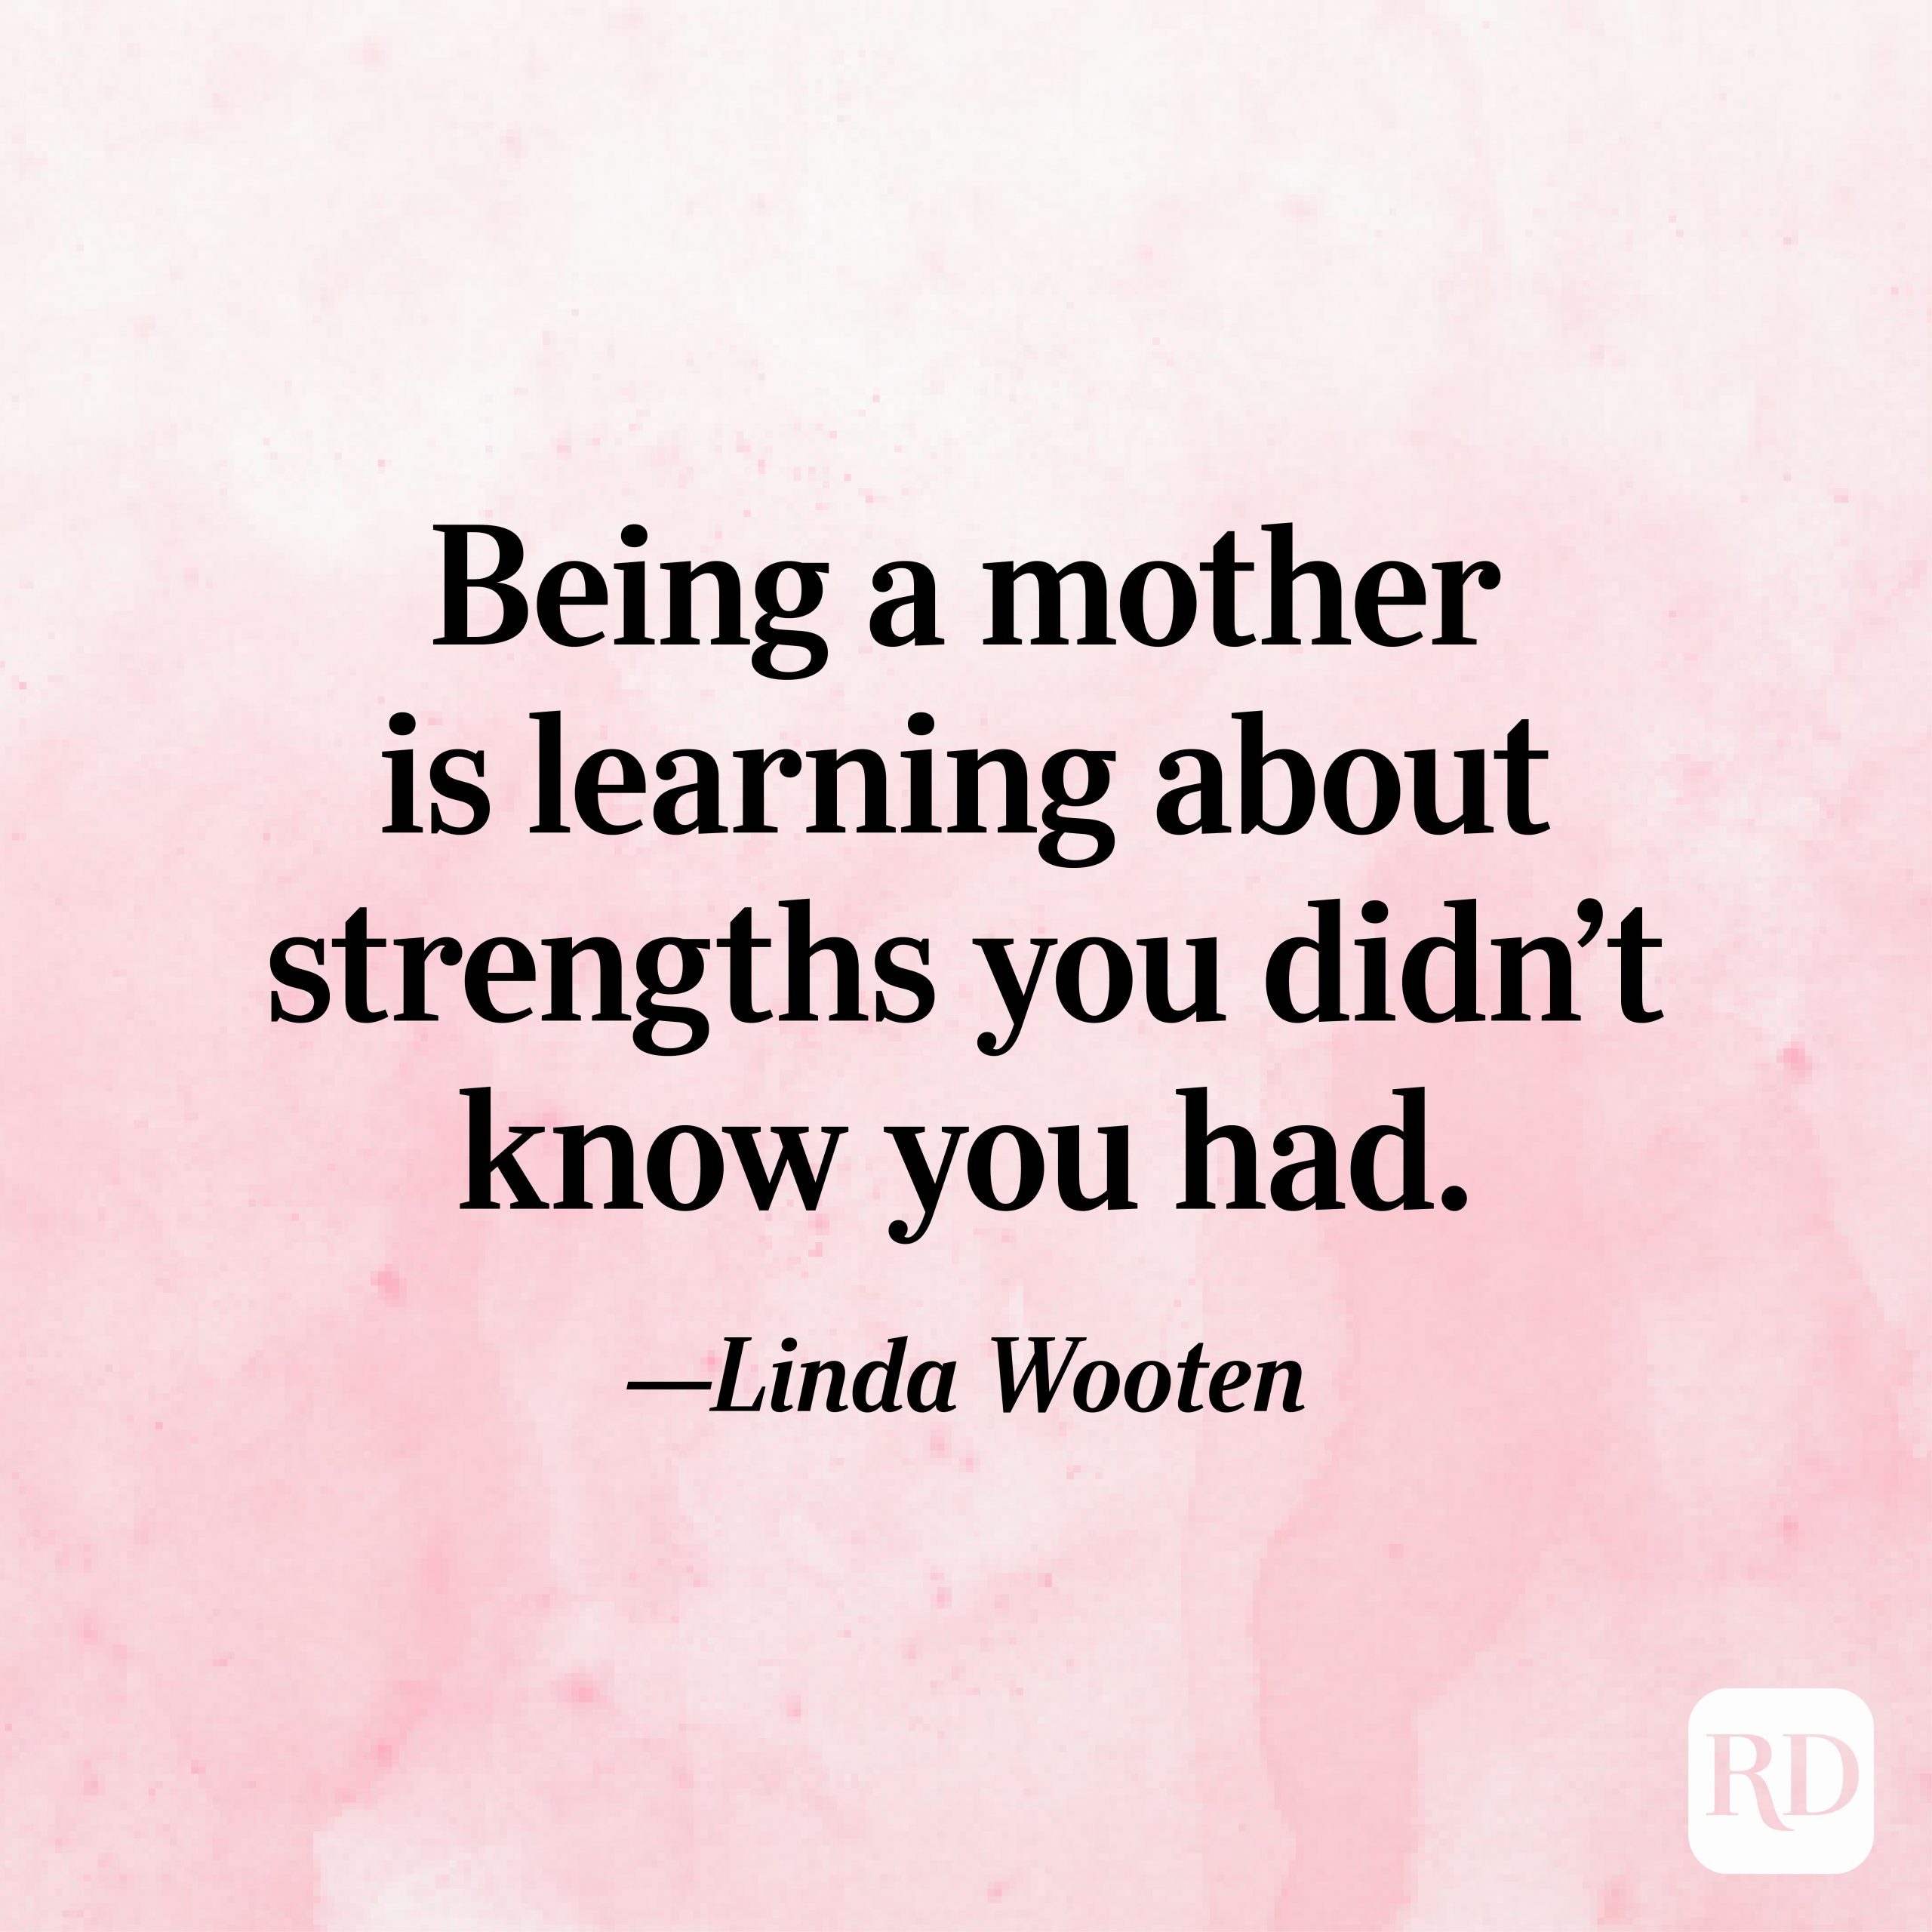 https://www.rd.com/wp-content/uploads/2021/02/16-Motherhood-Quotes-Thatll-Make-You-Call-Your-Mom-scaled.jpg?fit=700%2C700